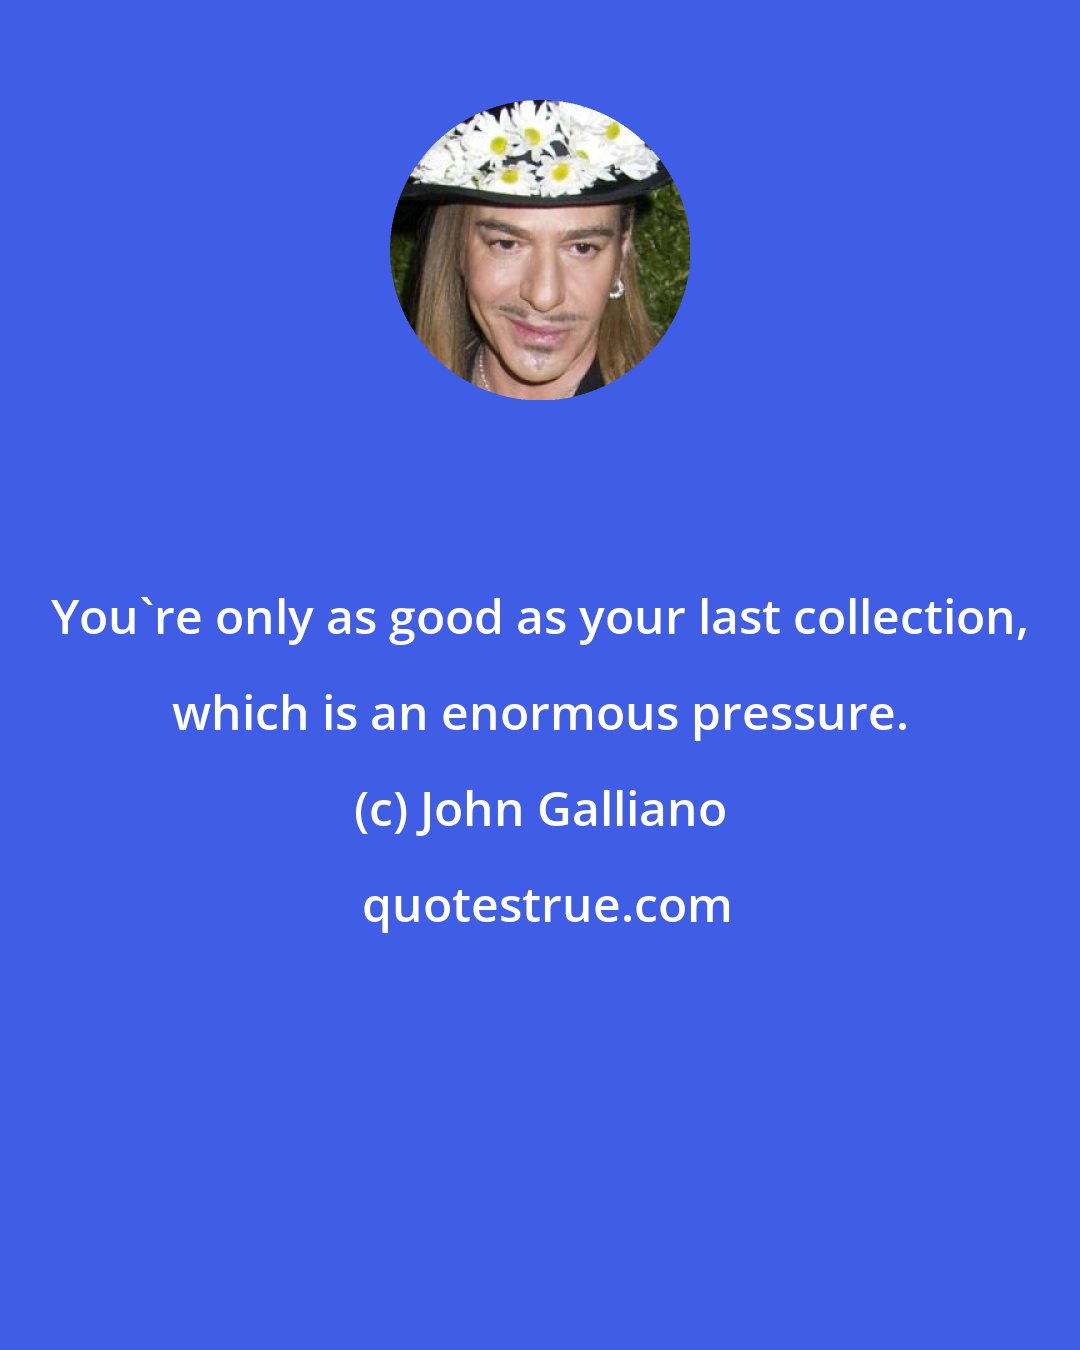 John Galliano: You're only as good as your last collection, which is an enormous pressure.